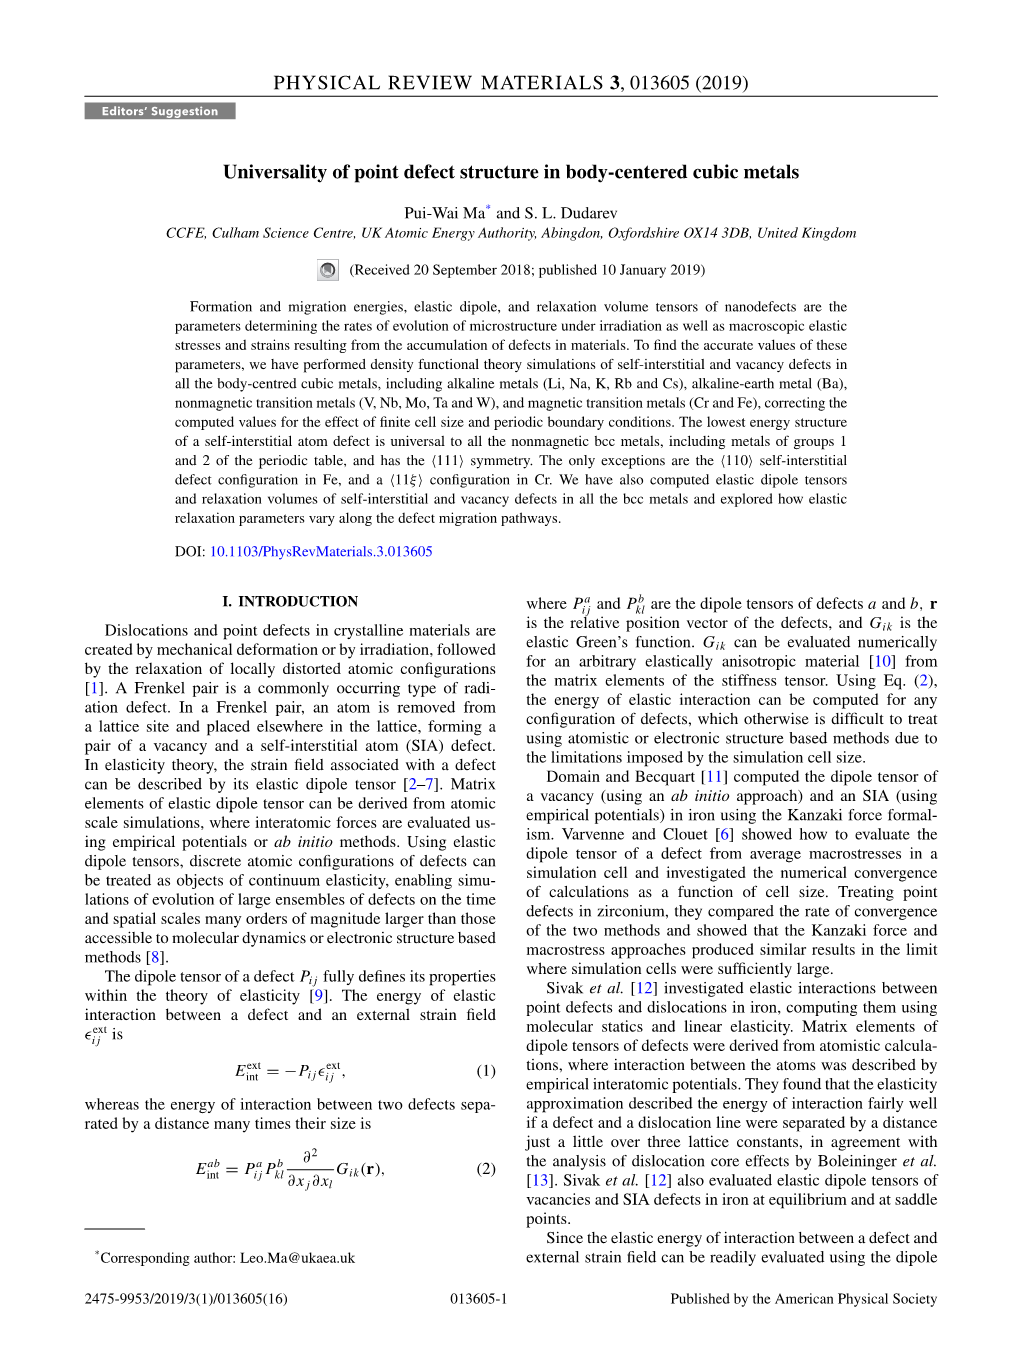 Universality of Point Defect Structure in Body-Centered Cubic Metals